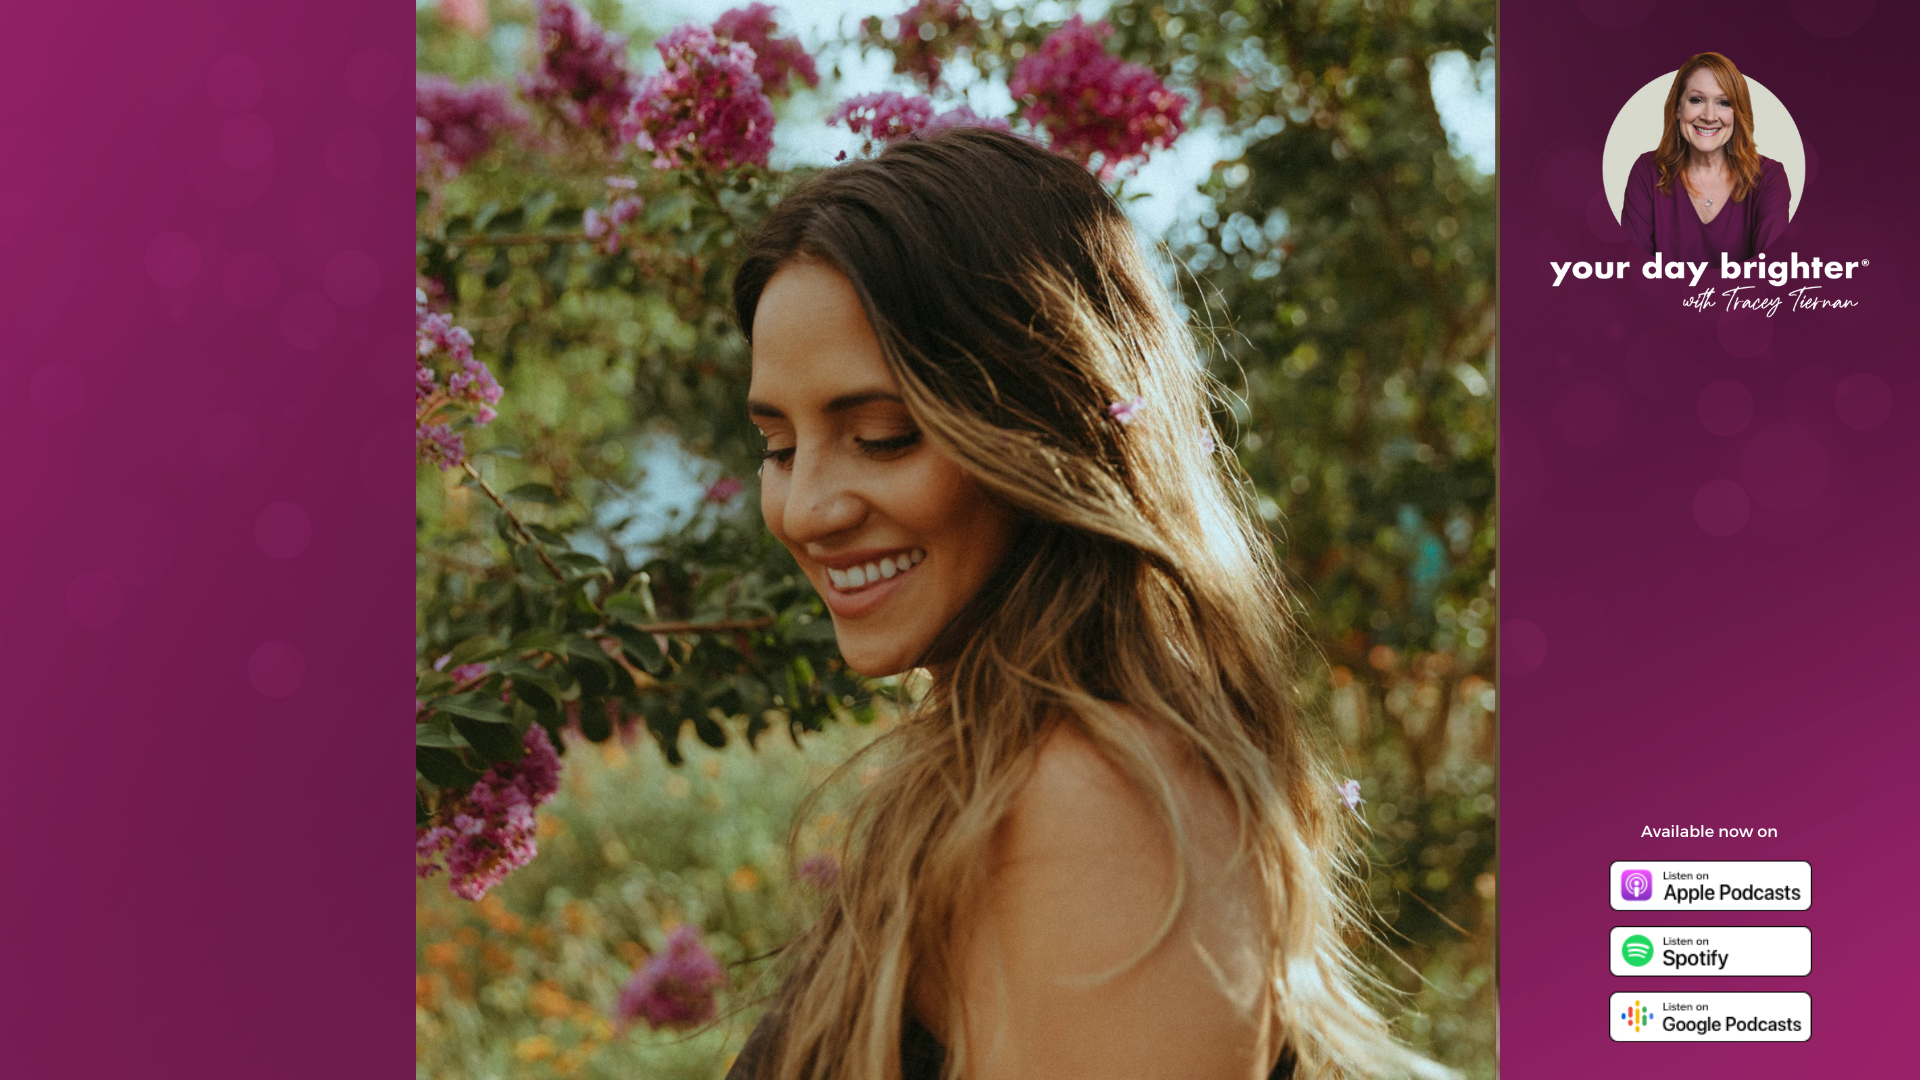 Rachael Lampa smiling in a green field next to a tree with purple flowers budding from it